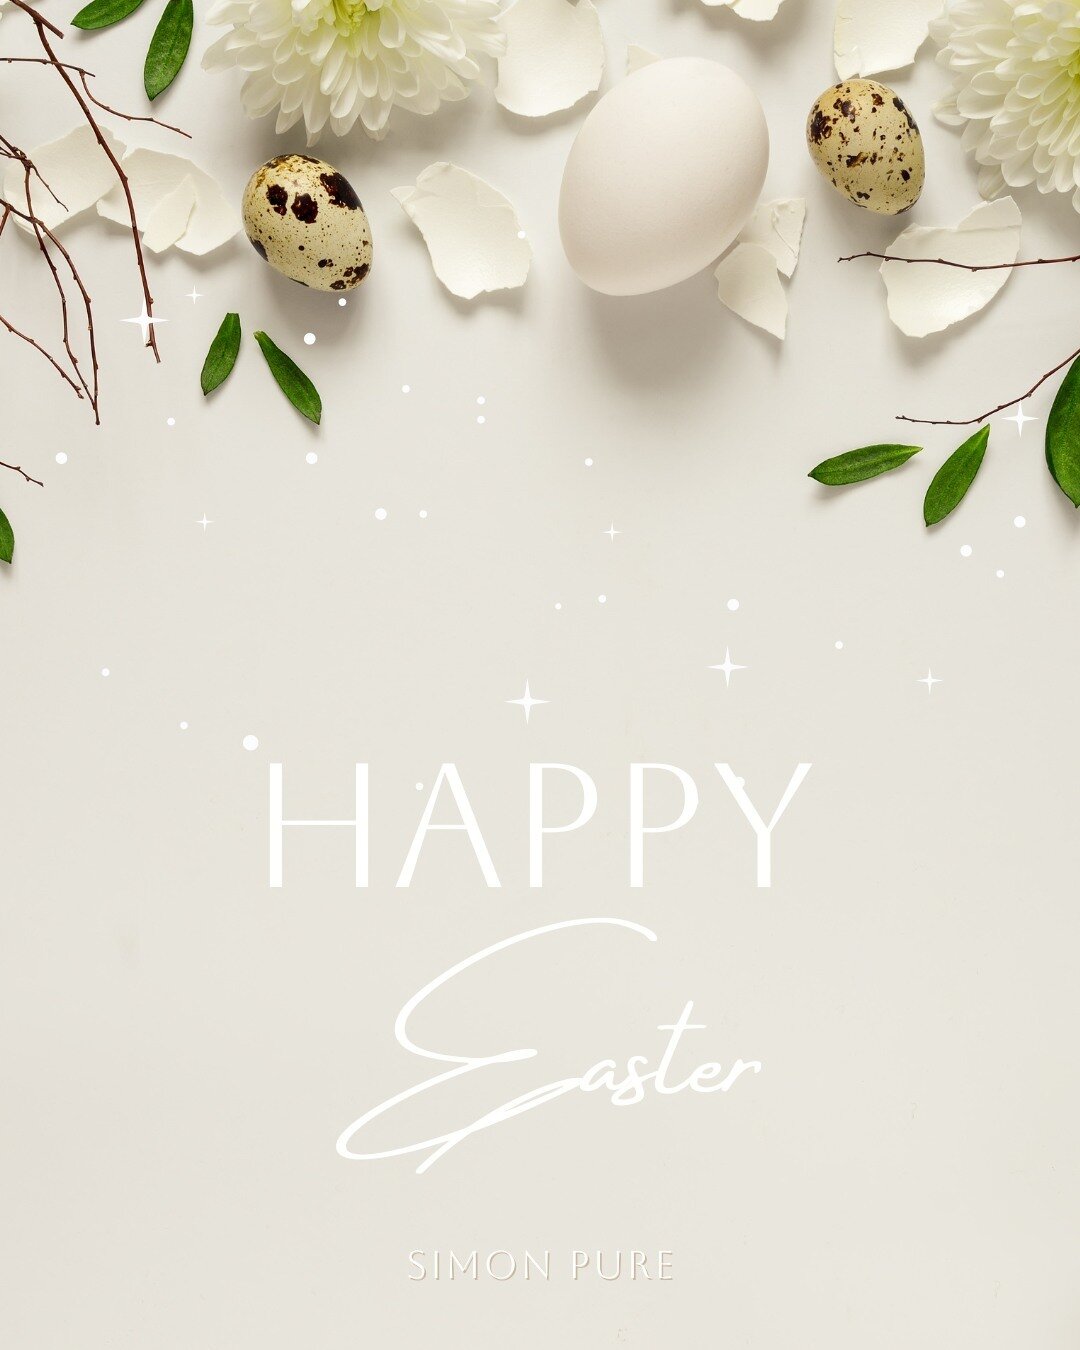 From all of us at Simon Pure, may your Easter weekend sparkle with joy! 🐰✨ 

#surrey #guildford #cranleigh #ukjewellers #surreyjewellers #ukjewellerydesigner #surreybusiness